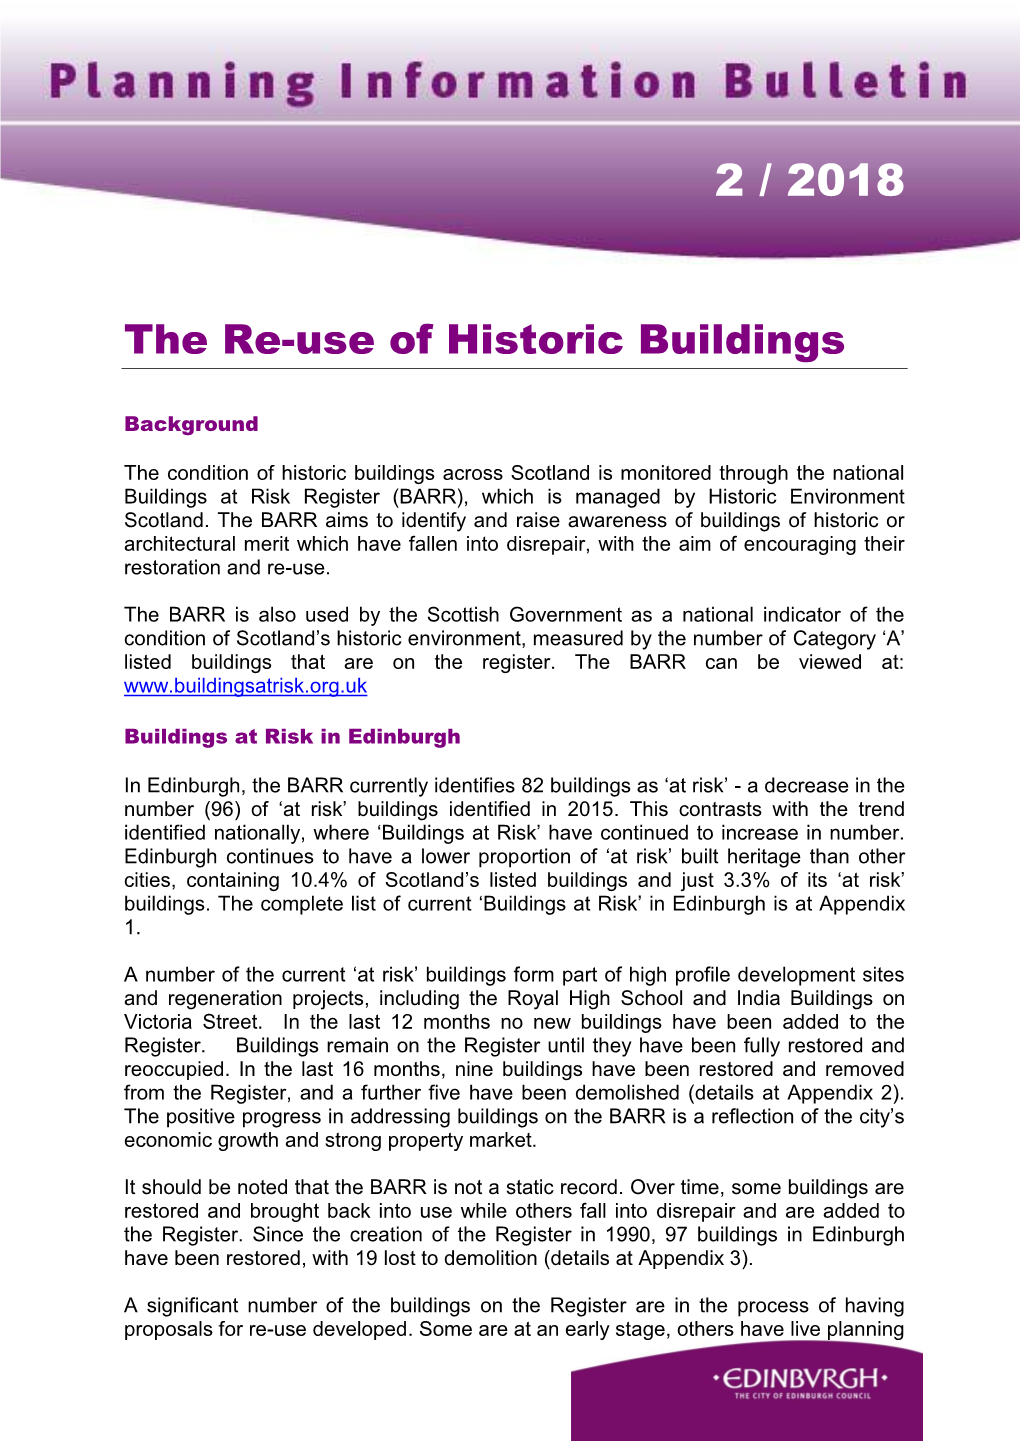 The Re-Use of Historic Buildings